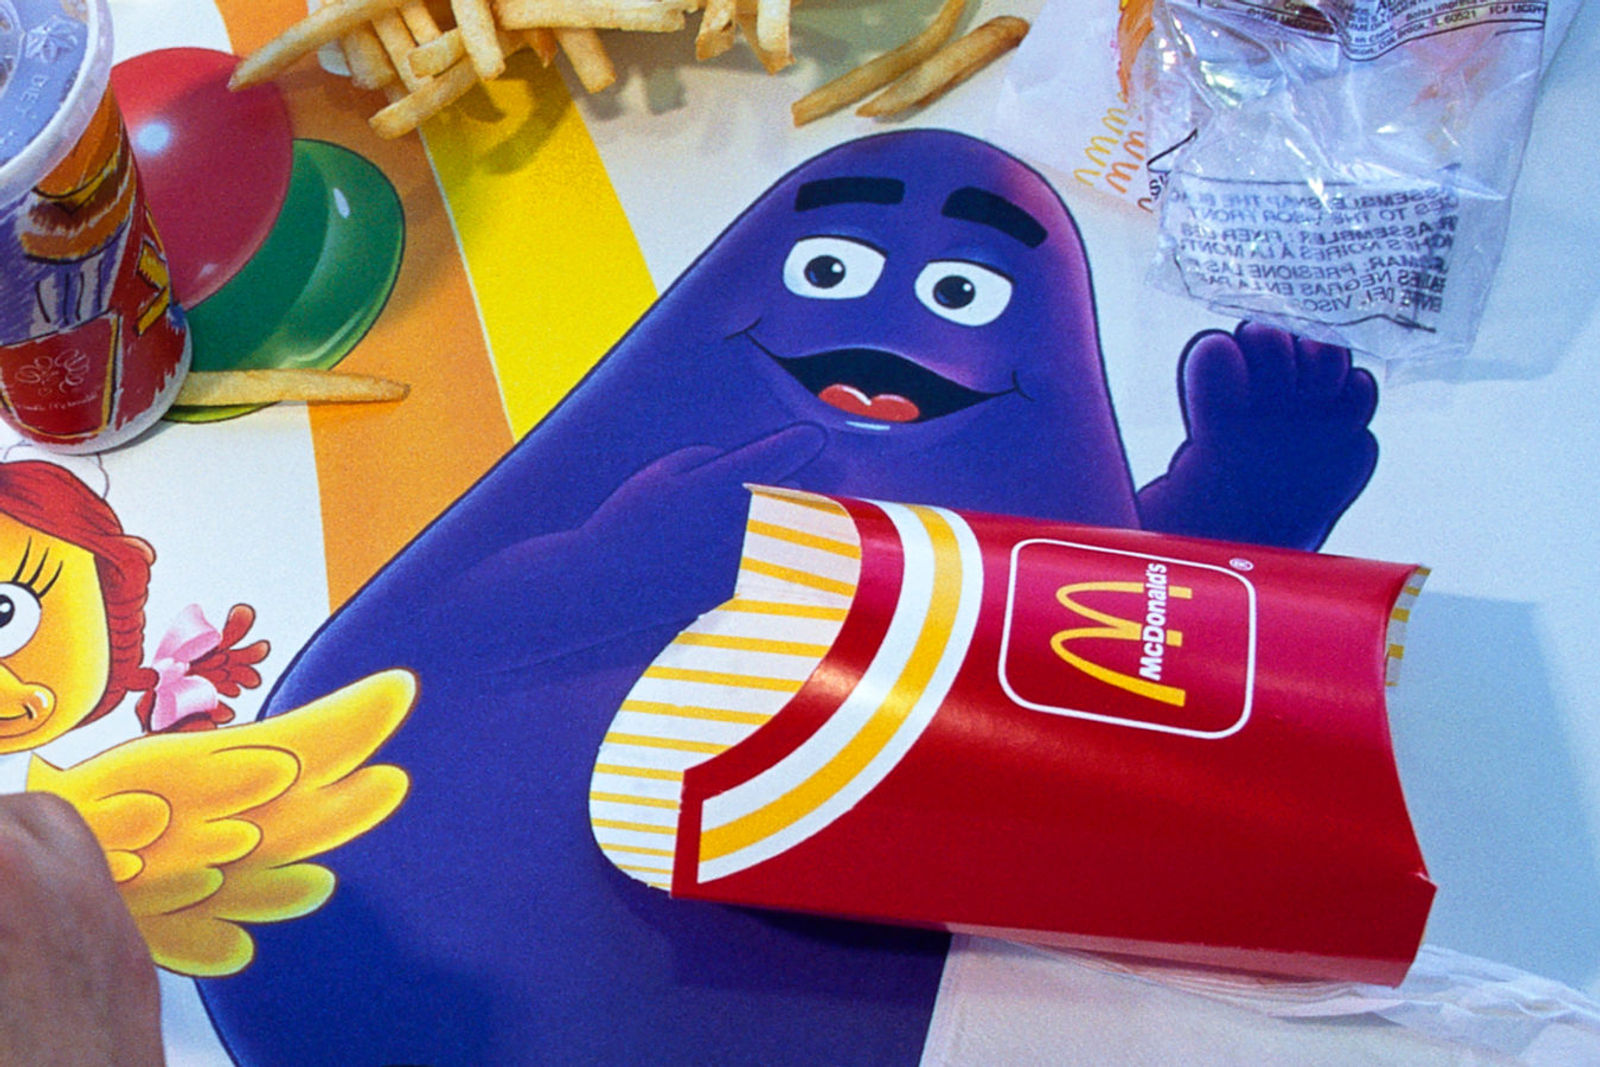 What or who exactly, is McDonald's grimace character?